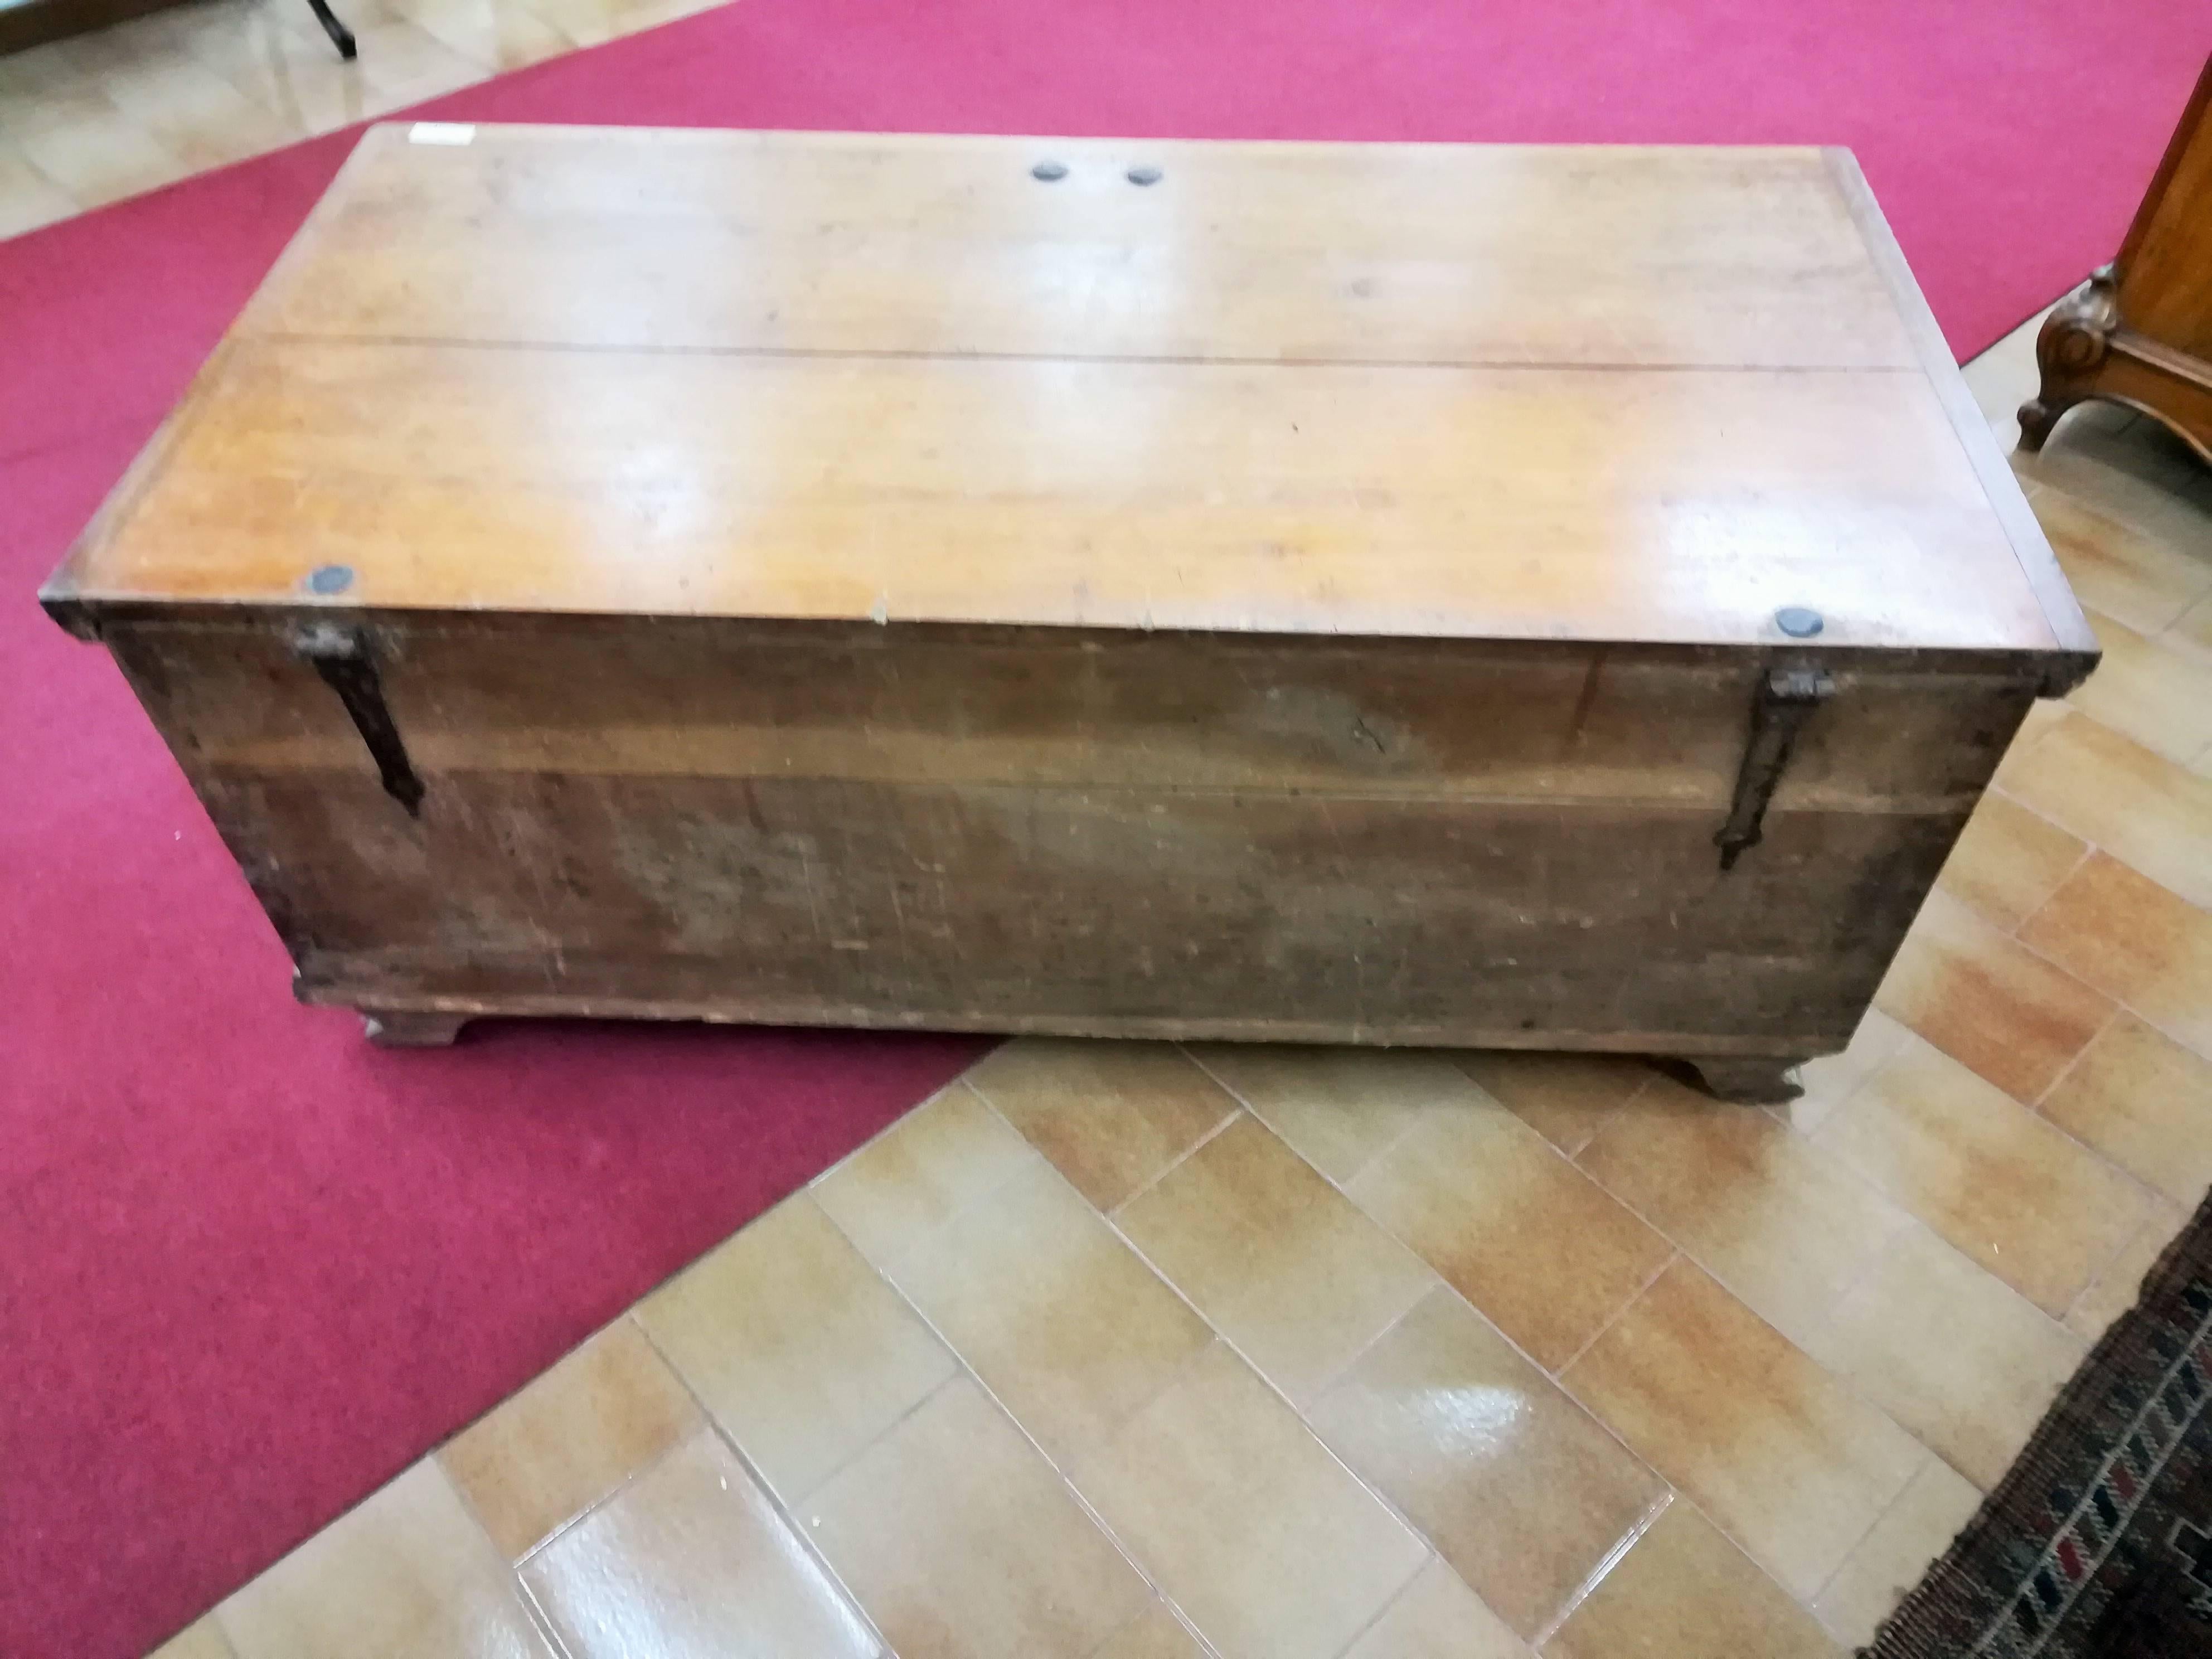 19th century Italian restored cherry chest. The key is original. It is all massive woods. The inside it has to be restored. The restauration takes 1 week.